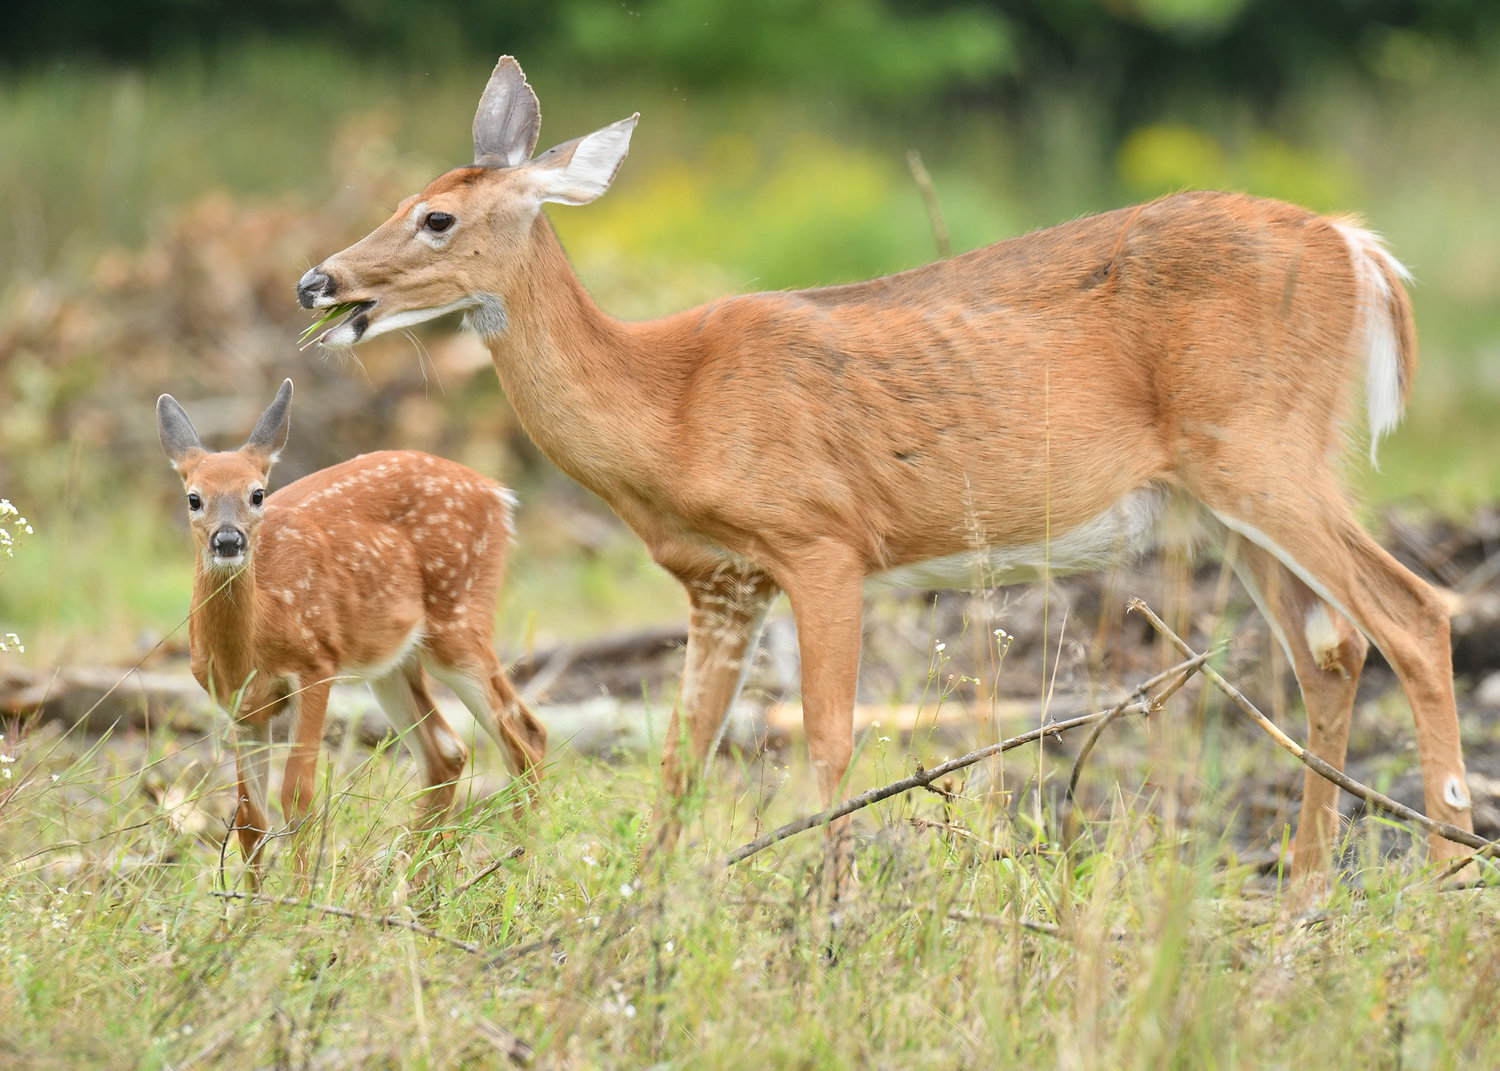 A doe and her fawn nibble away in the tall grass at Delta Lake State Park recently. As summer has given way to fall, deer will spend much of their time trying to pack on some extra pounds to prepare for the potential of a harsh winter ahead. But, before the snow and cold arrives, the fall season will provide its colorful foliage show.